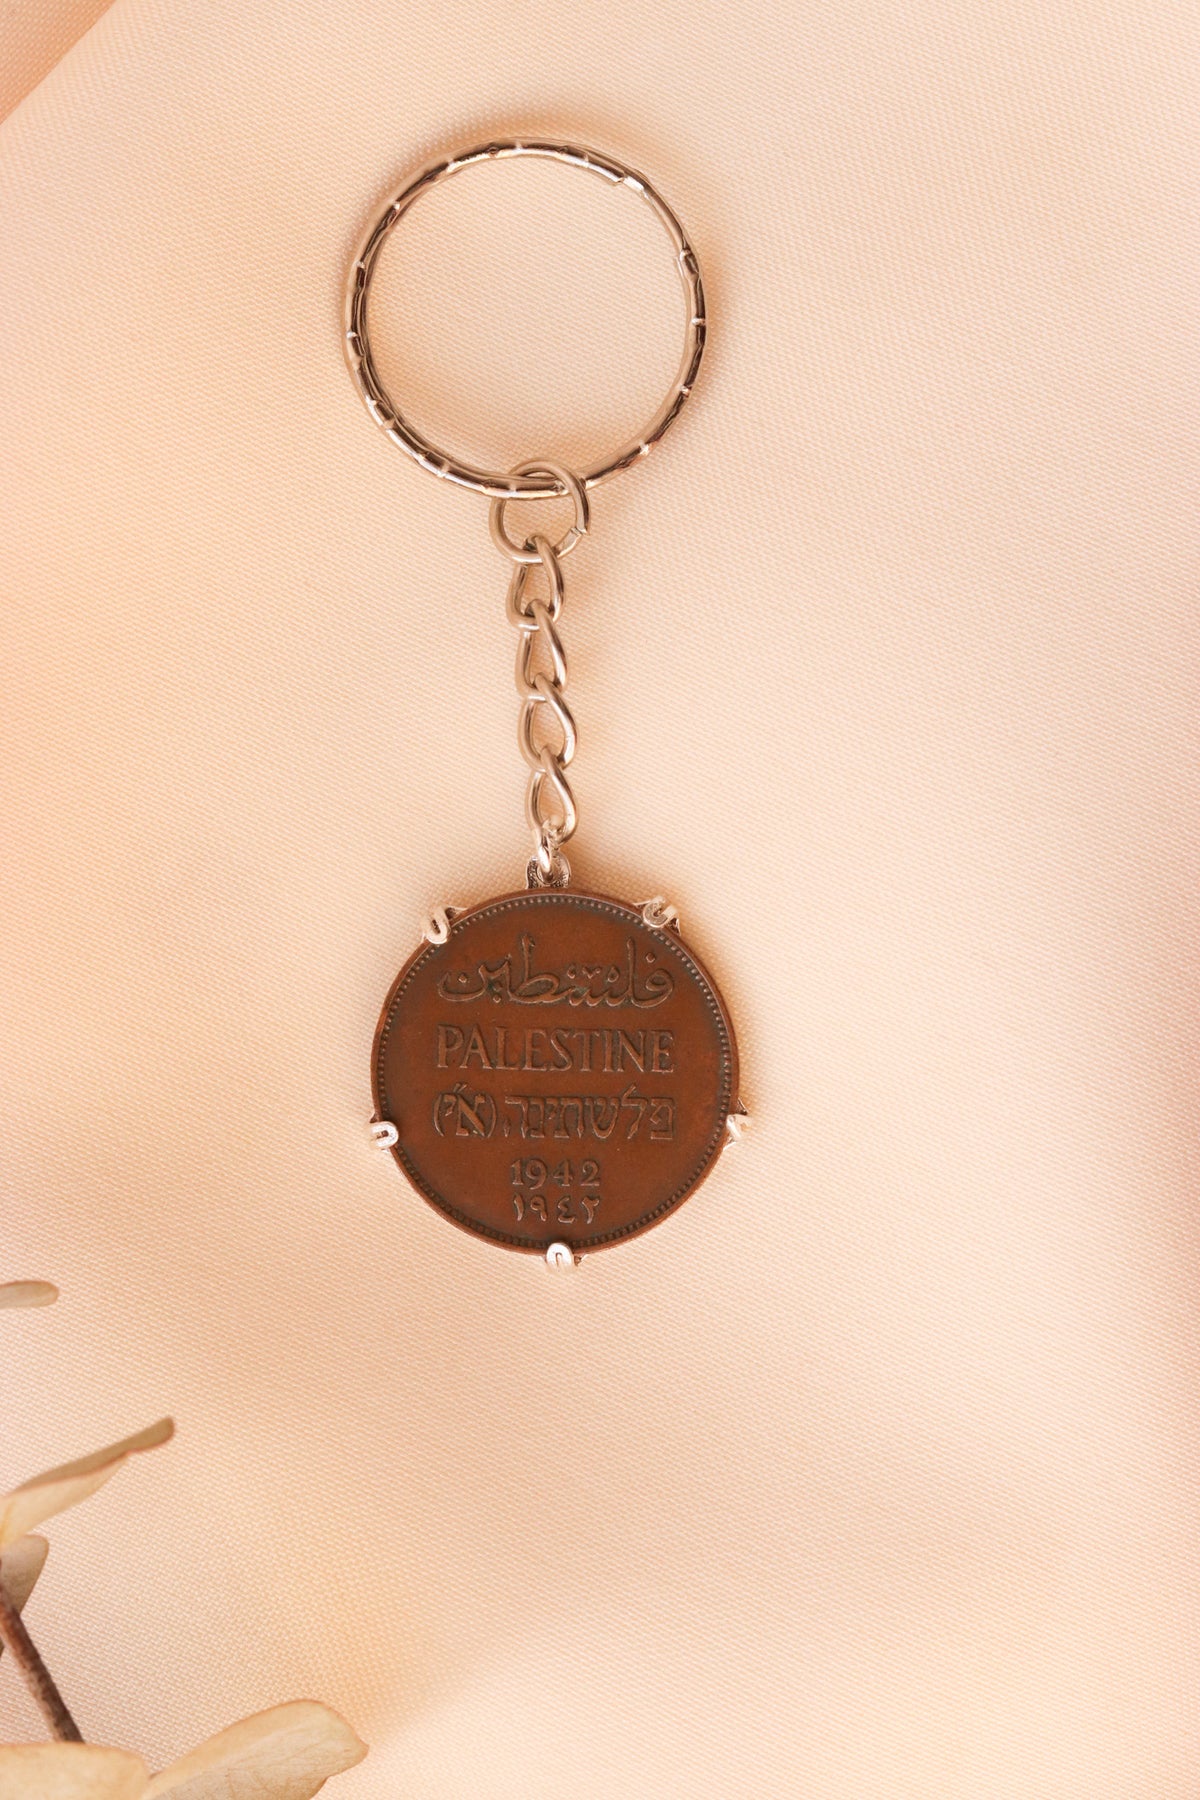 Palestinian coin 2 mil crown frame keychain